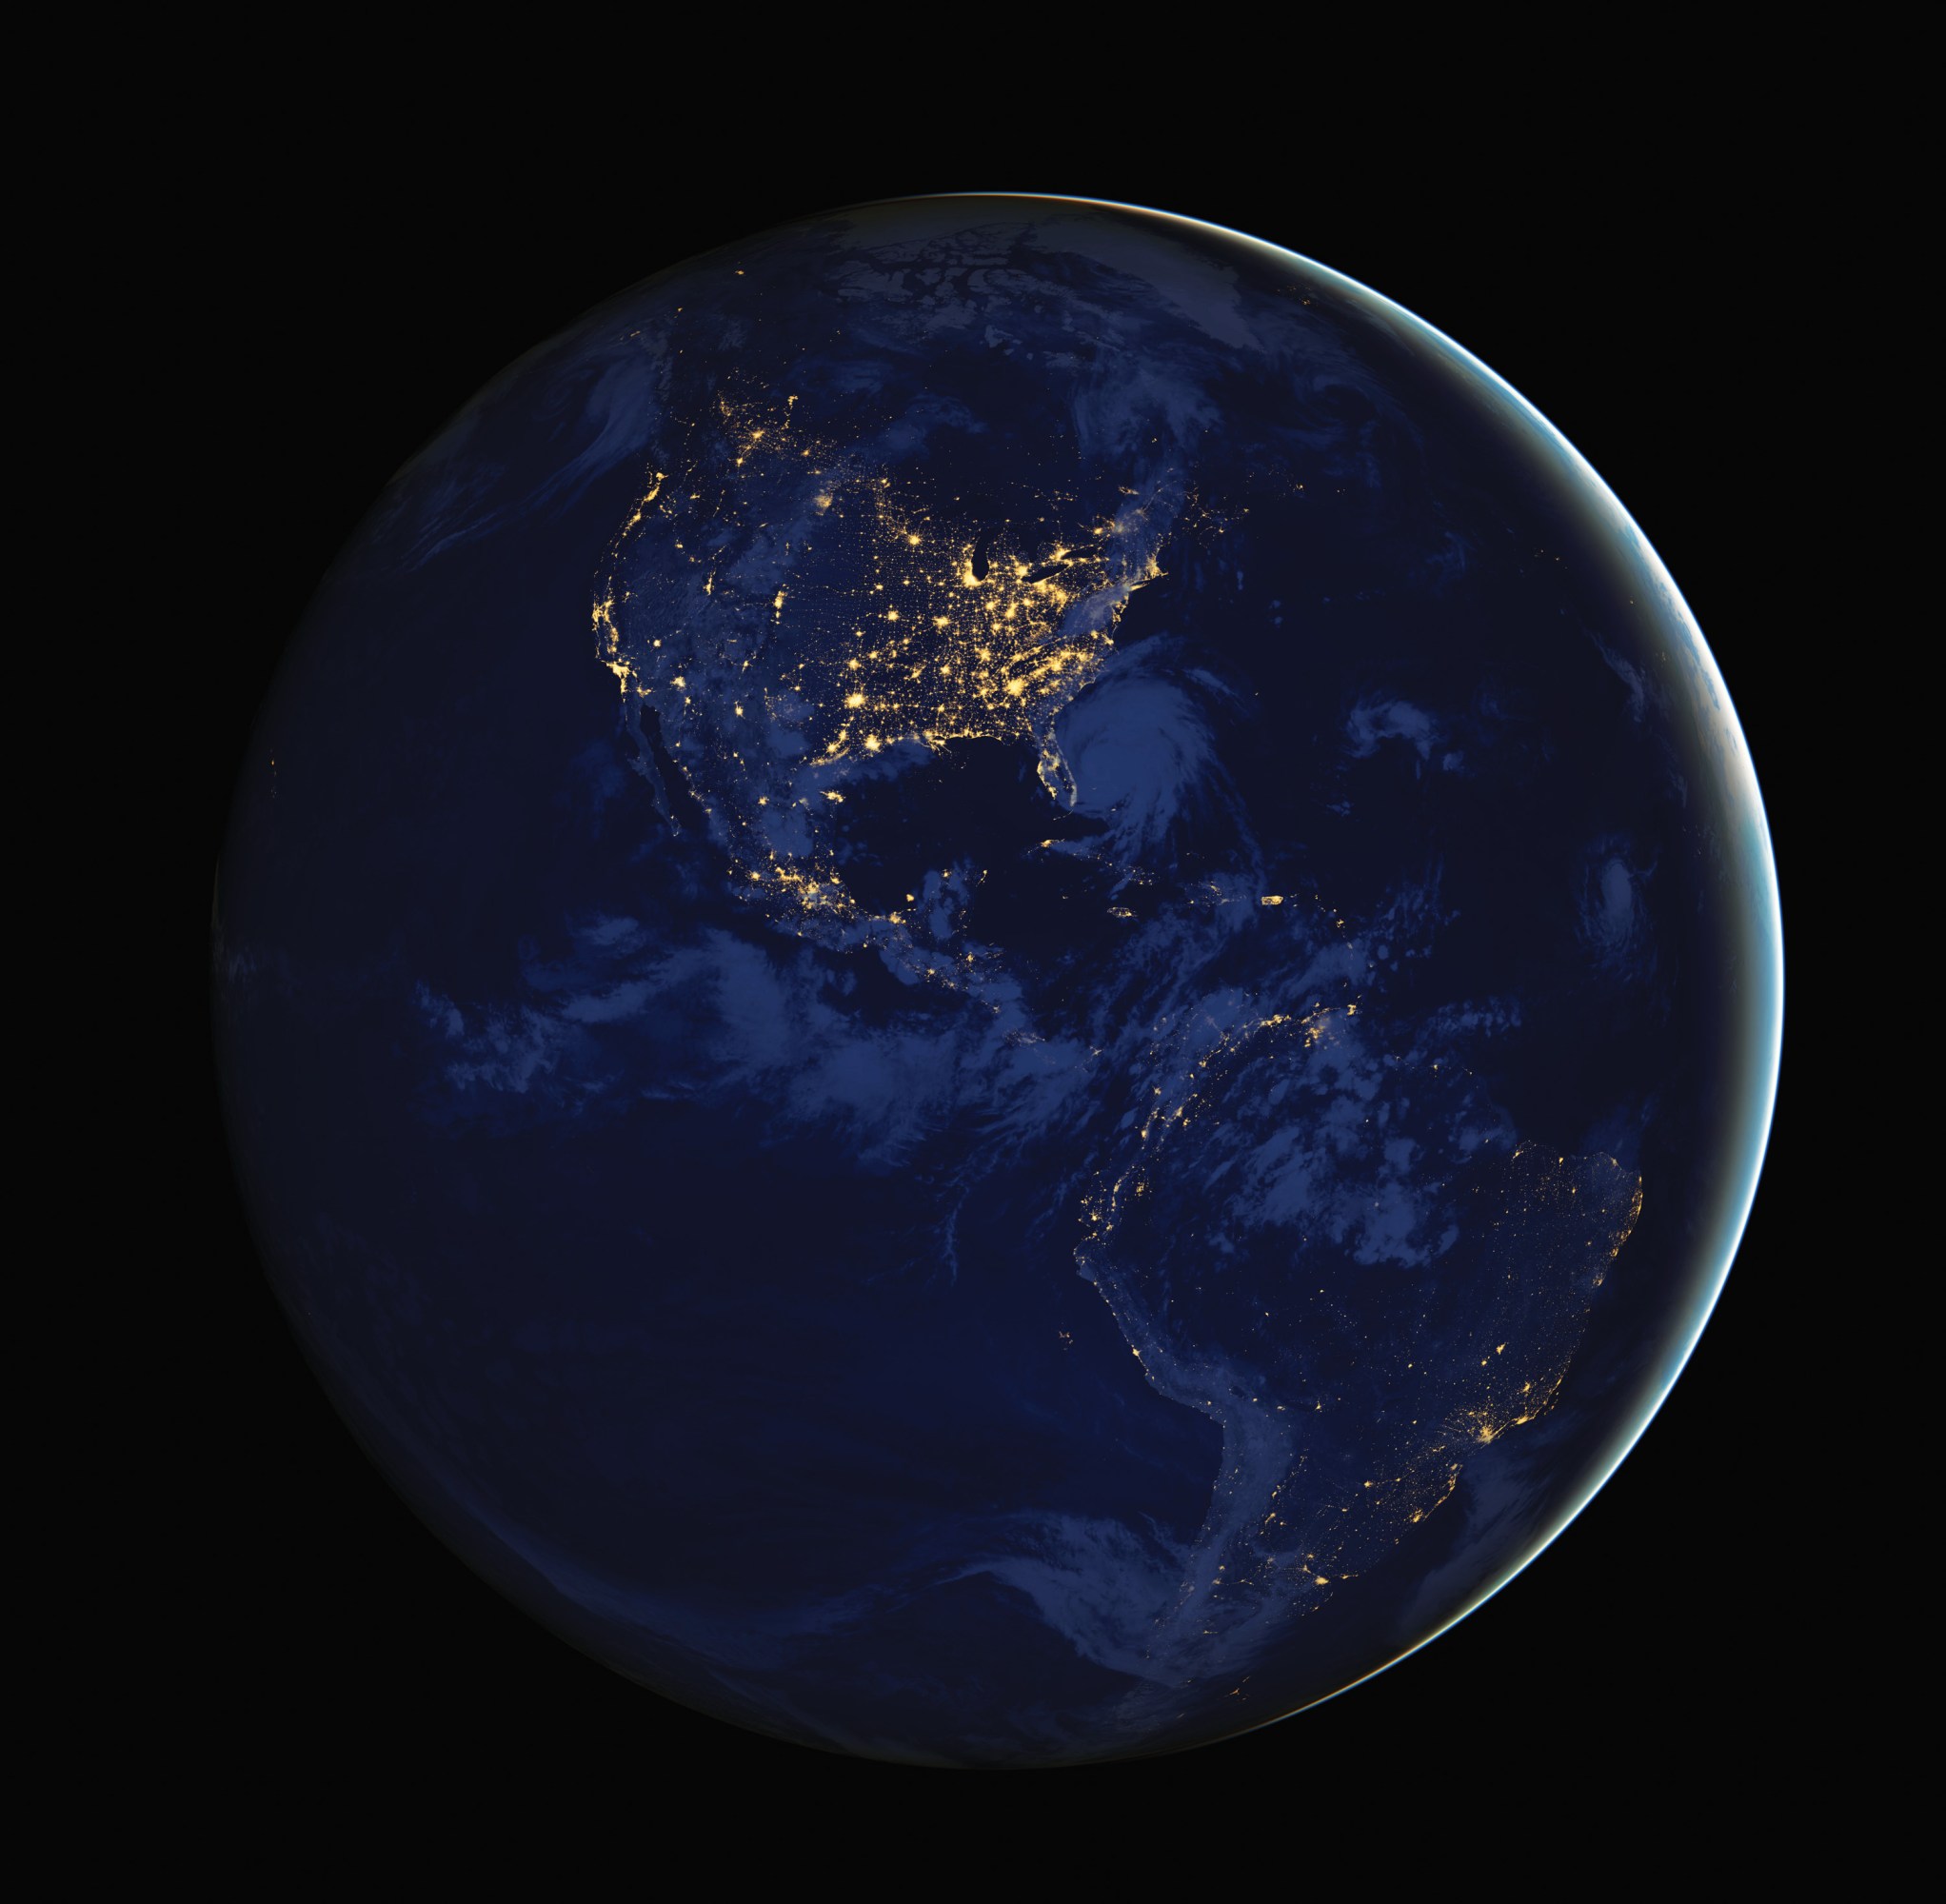 a satellite view of Earth on the hemisphere away from the sun with city lights visible